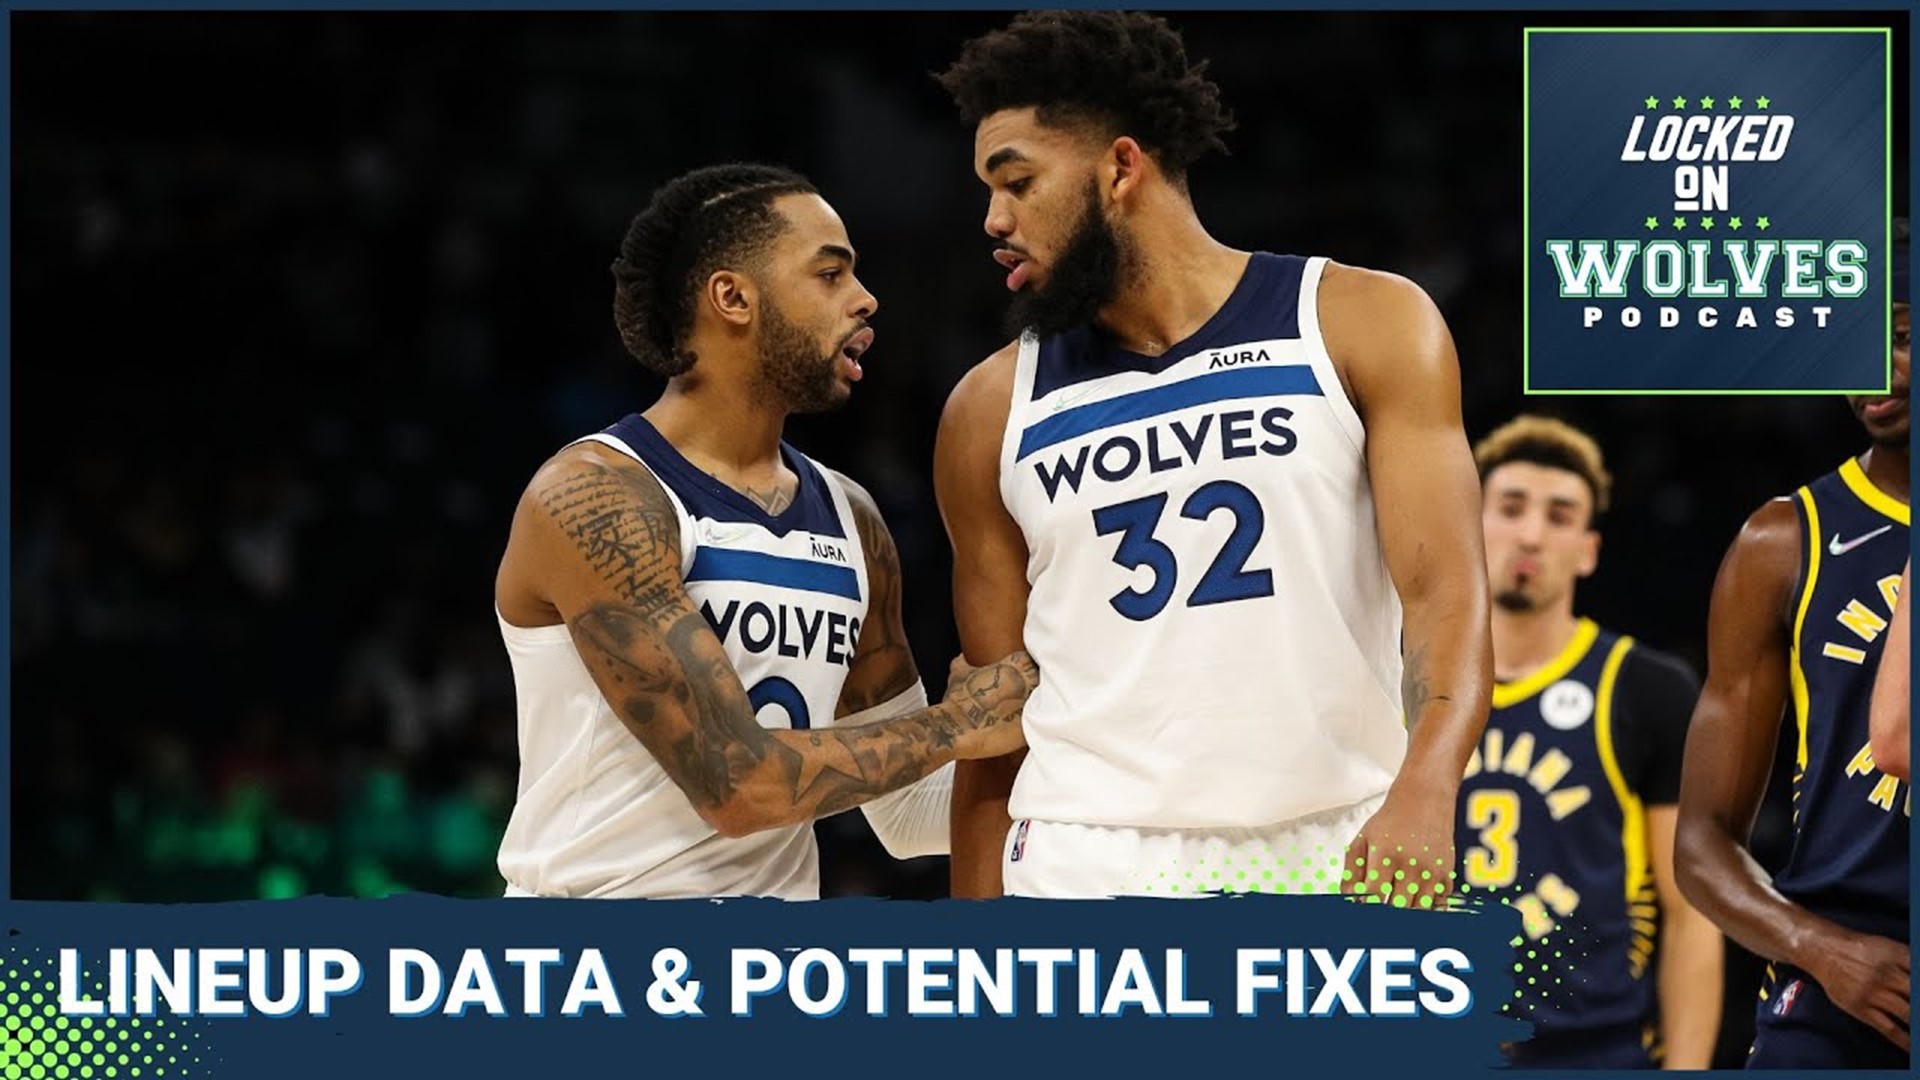 Early Timberwolves lineup data, issues and fixes for the offense, and Wolves-Suns preview